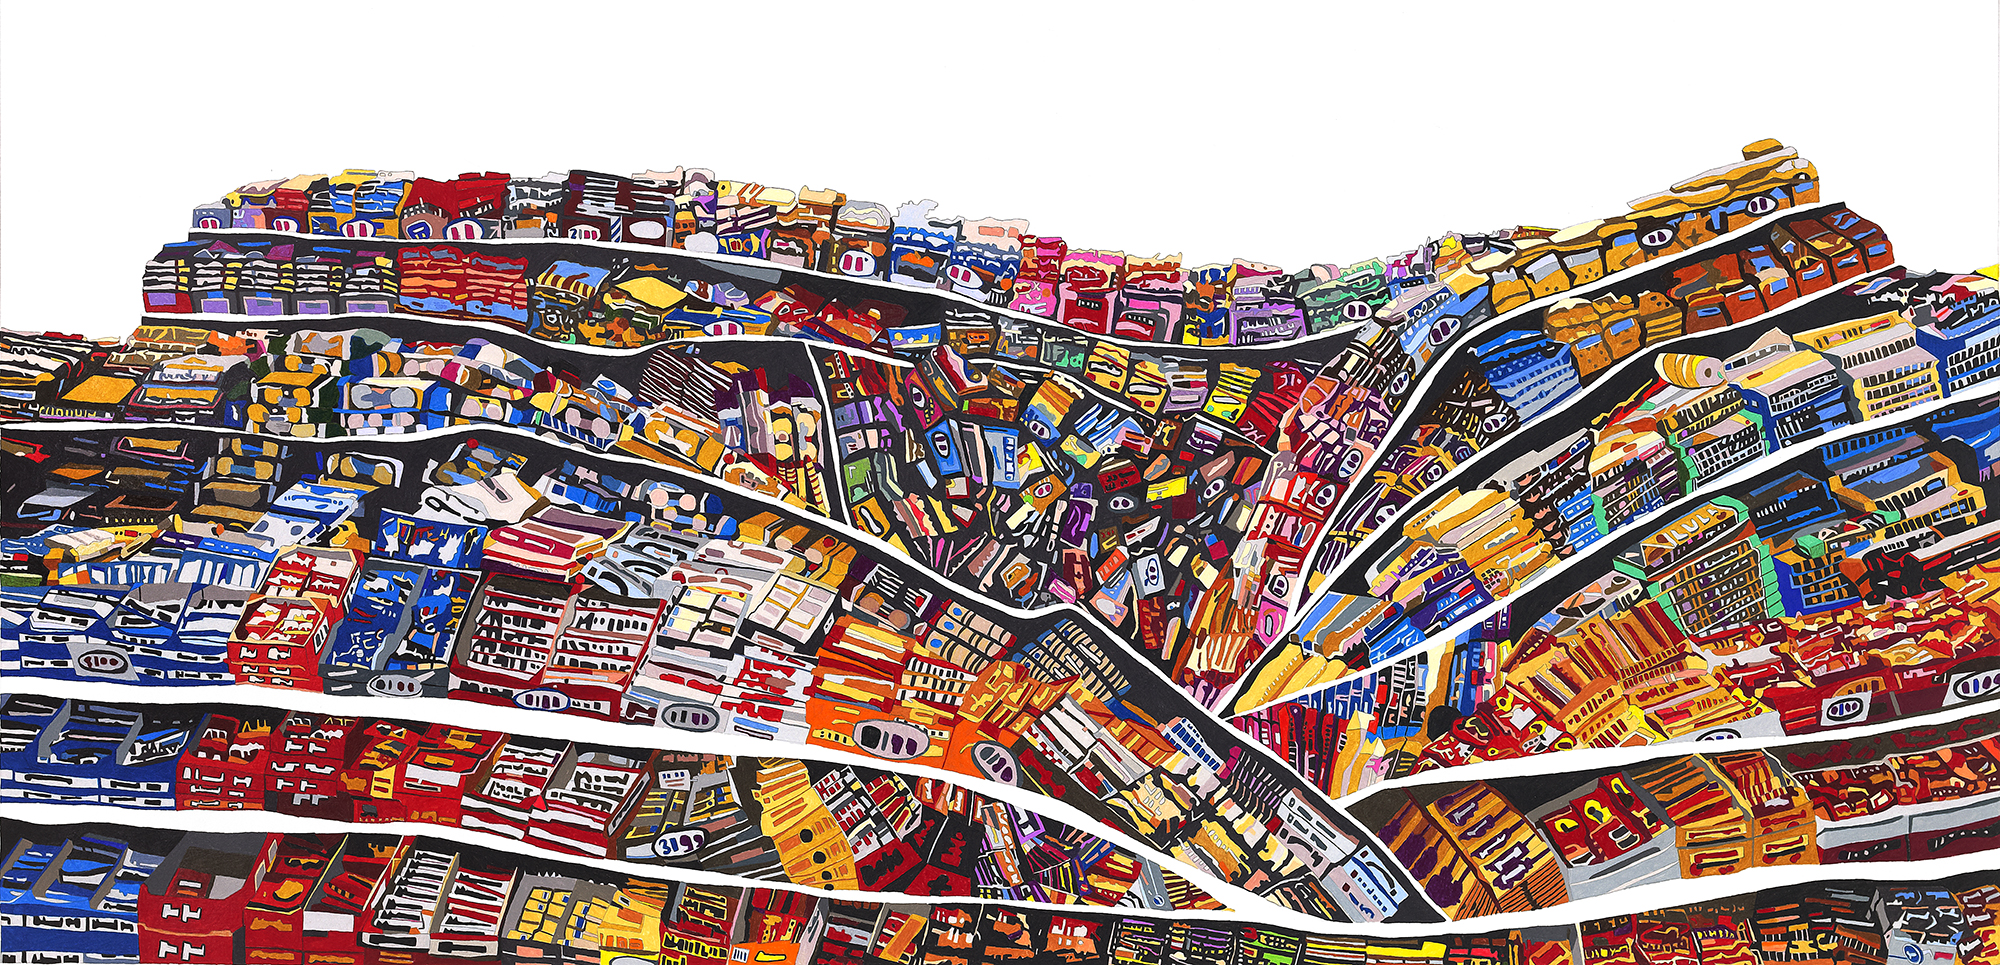 13. Supermarket Collapse, 2011, colored pencil on paper, 24” x 48”